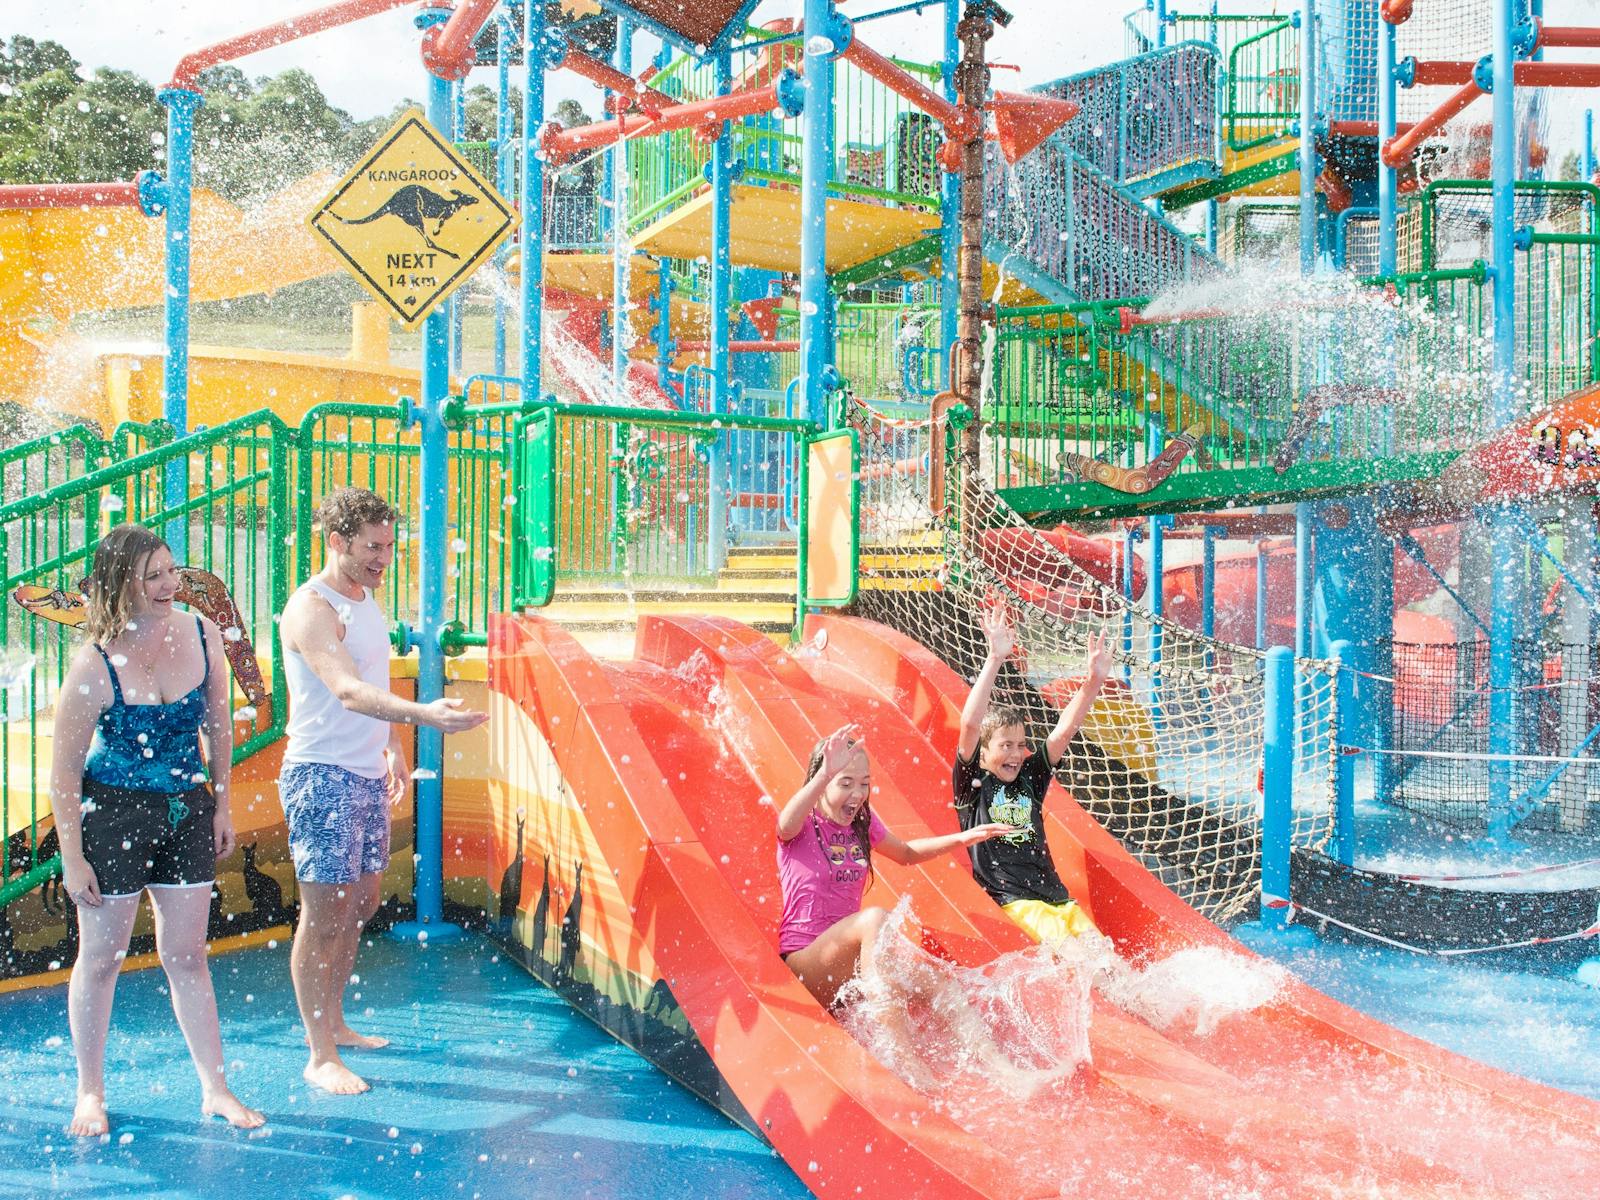 Image for NSW Grandparents Day at Jamberoo Action Park